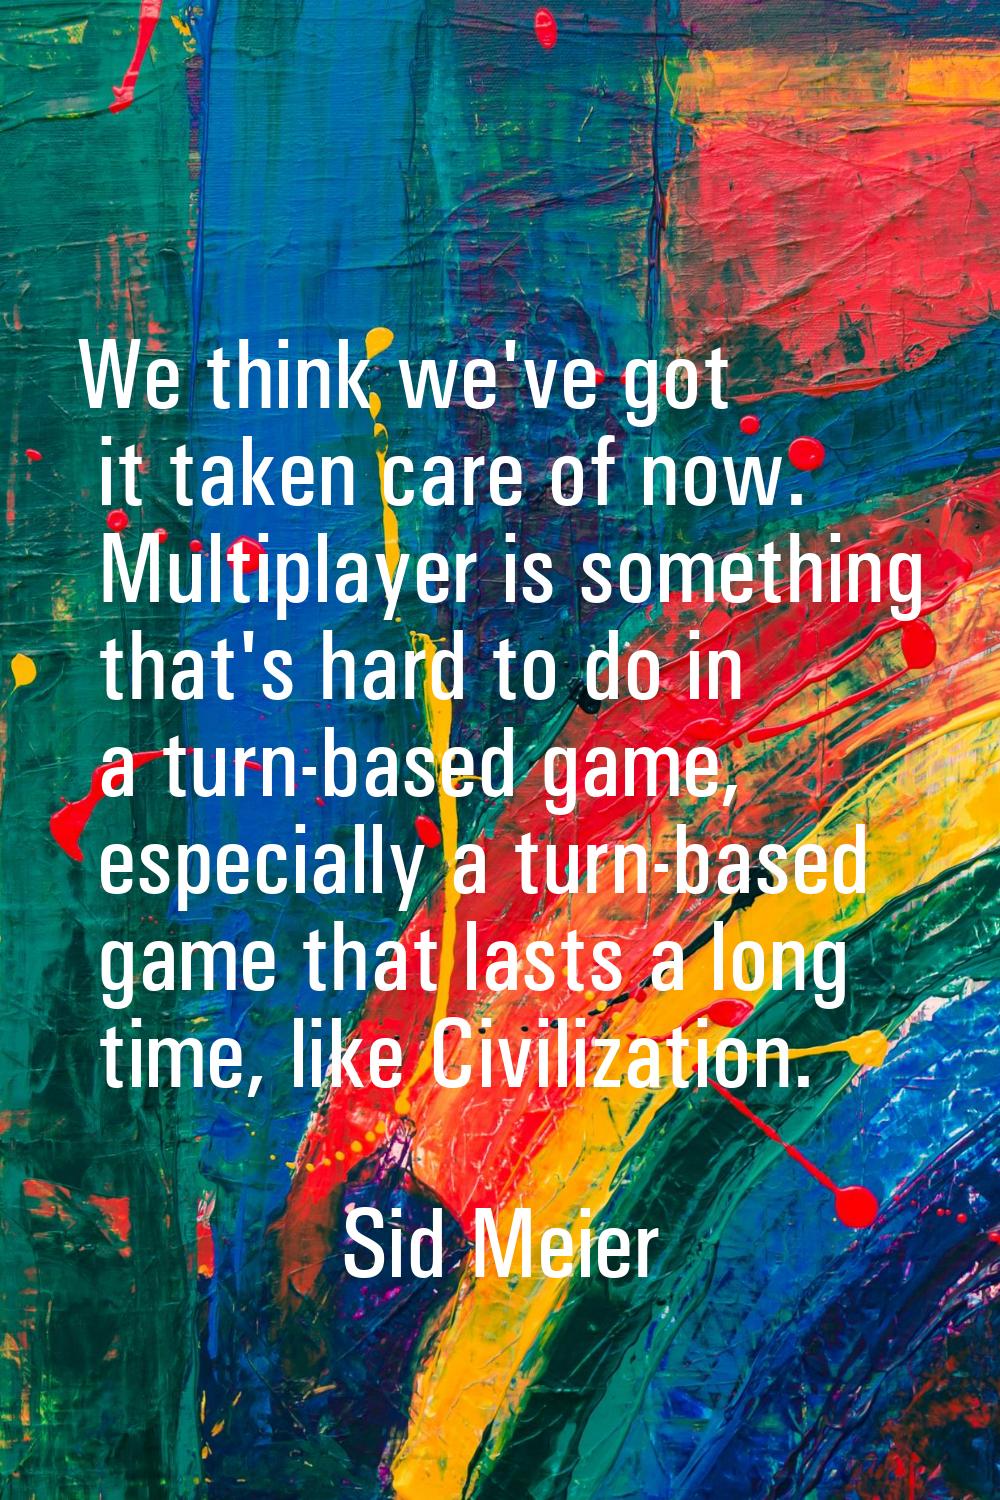 We think we've got it taken care of now. Multiplayer is something that's hard to do in a turn-based